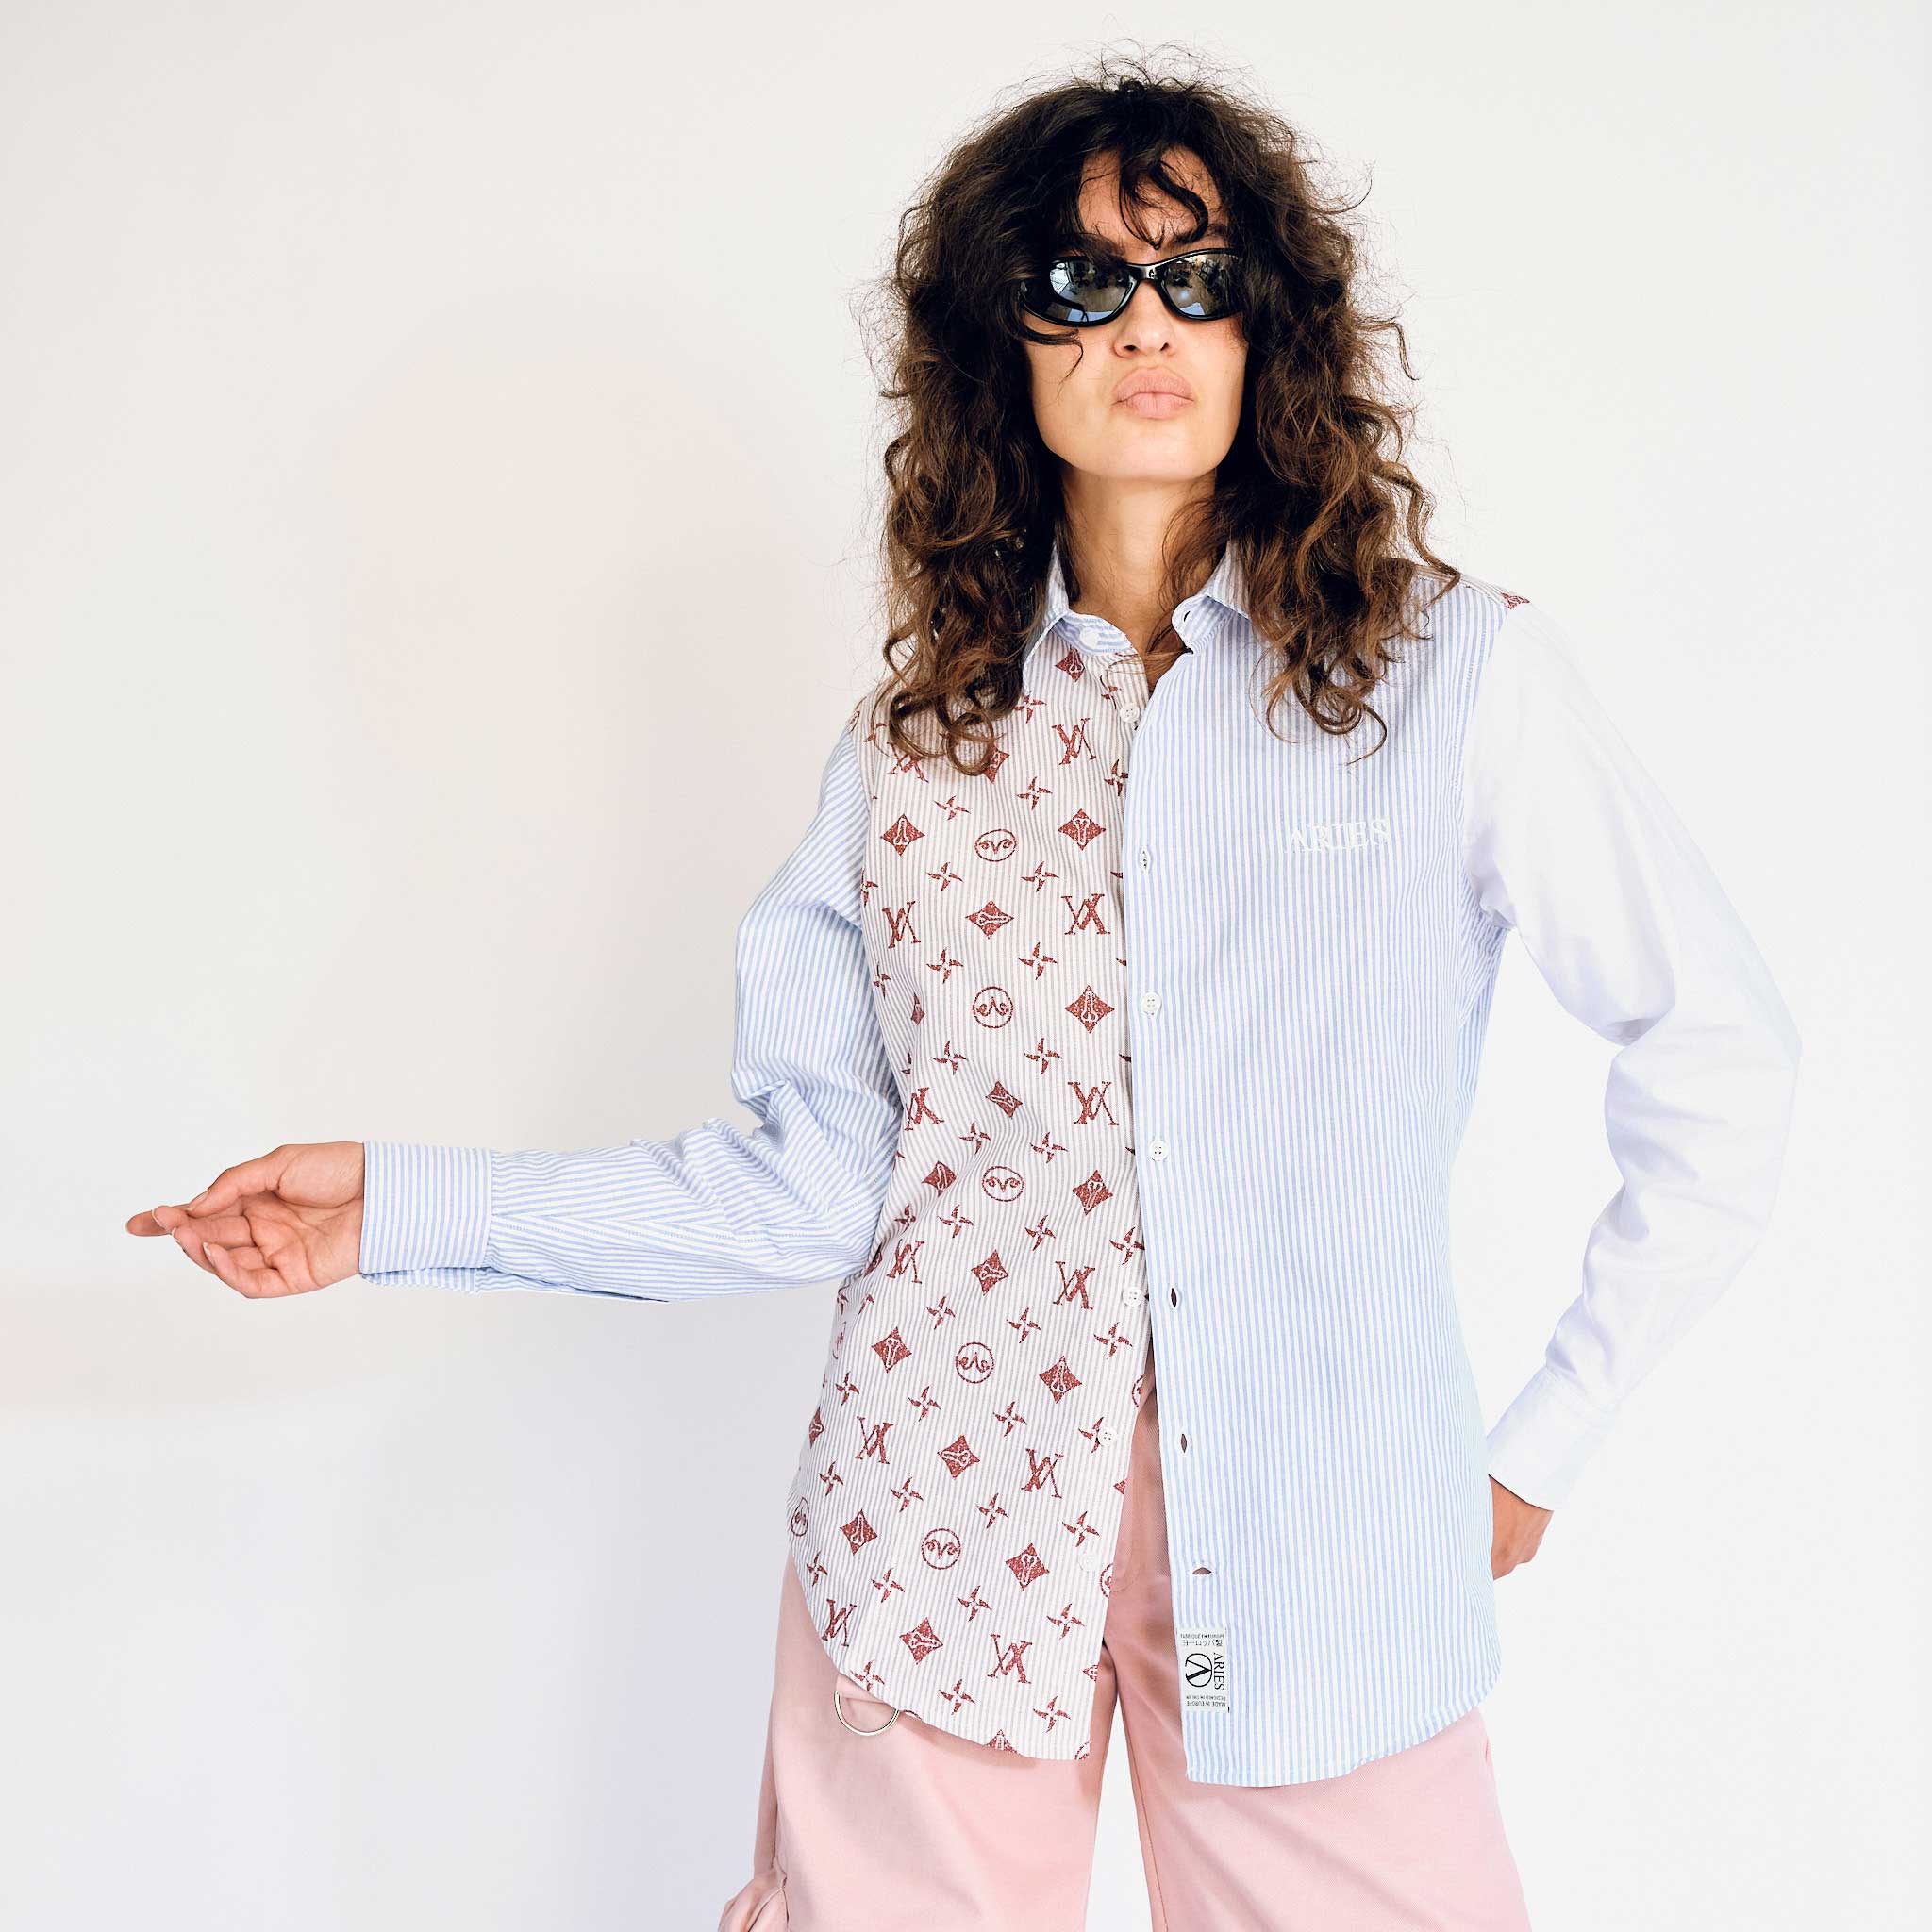 A model wears the upcycled patchwork button up shirt from Aries, which has various Aries iconography printed on the right half of the shirt and is pinstriped on the left side - front view.